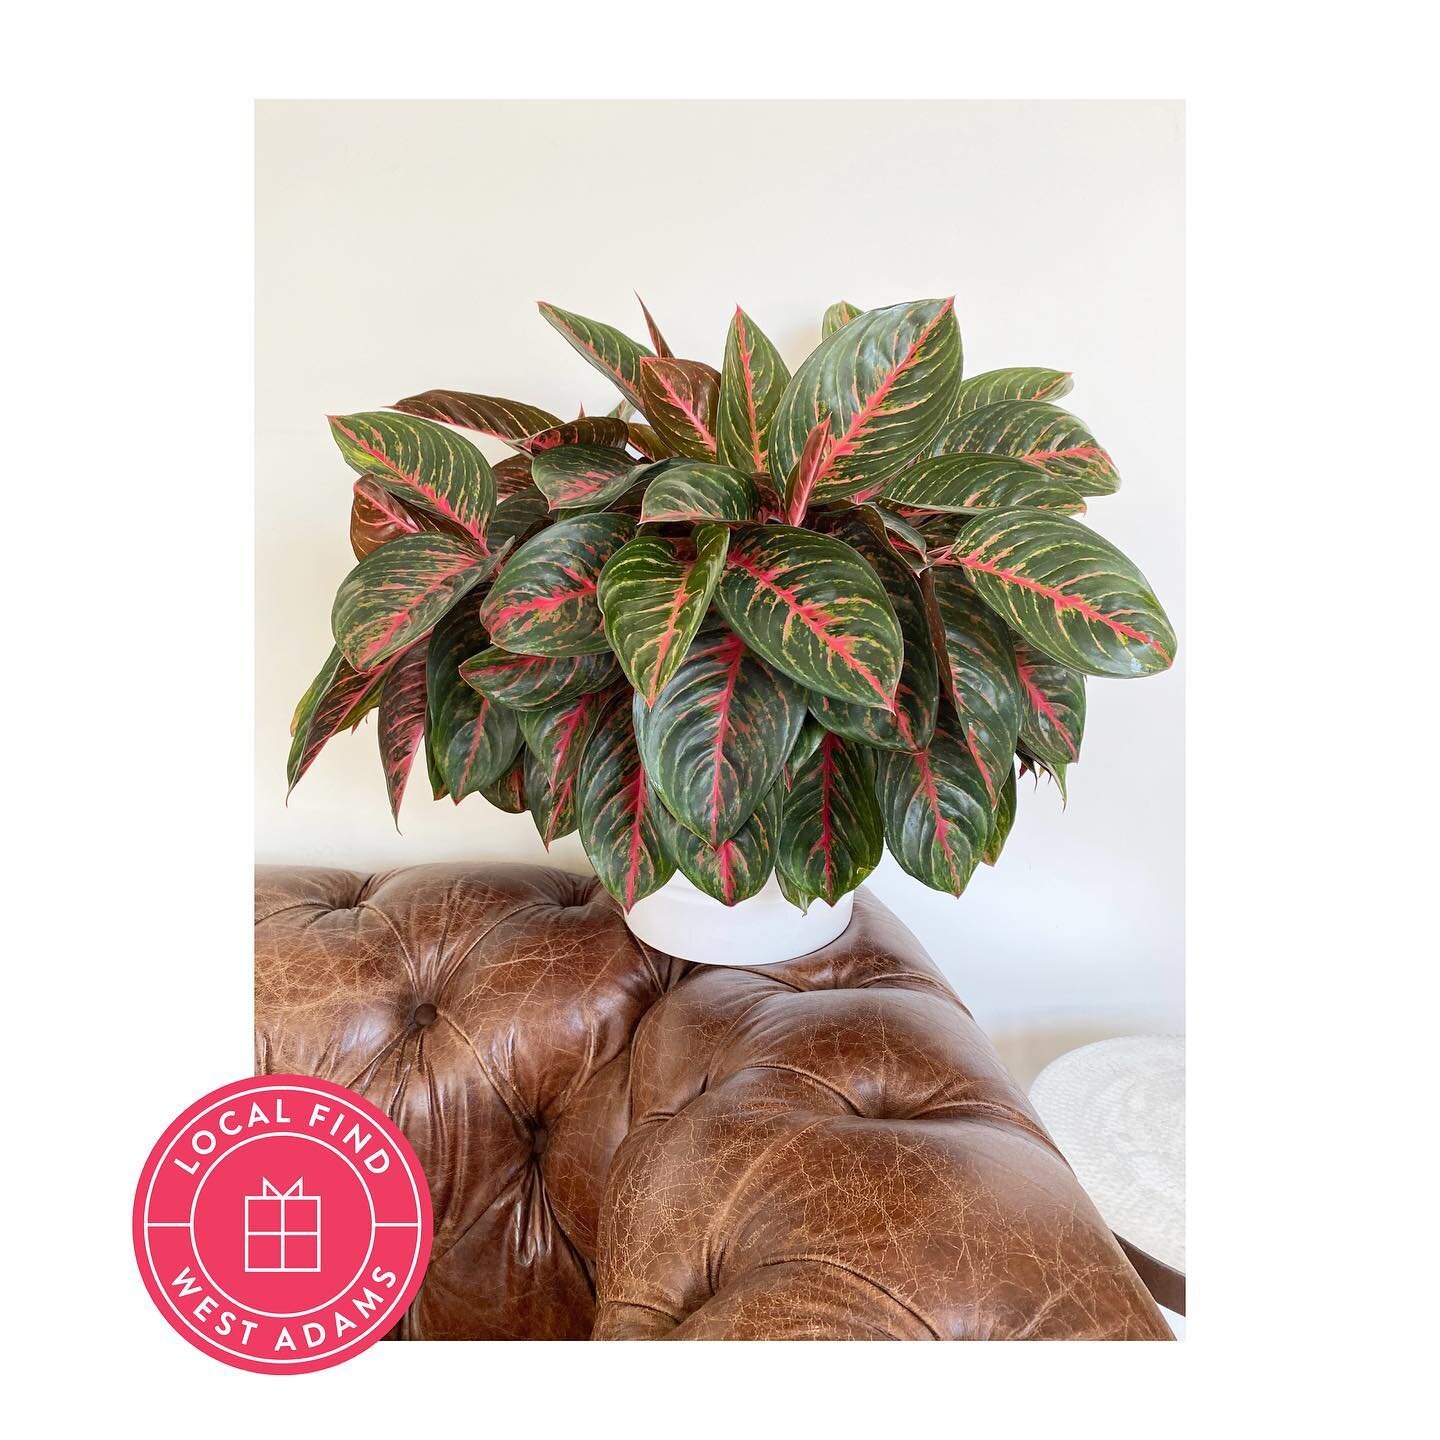 Visited @theplantchica on Jefferson and grabbed this amazing #chineseevergreen It came with cutest card full of care instructions. We&rsquo;ll be filling the office with many more plants! 

#shoplocal #realestatecollective #theplantchicawestadams #we